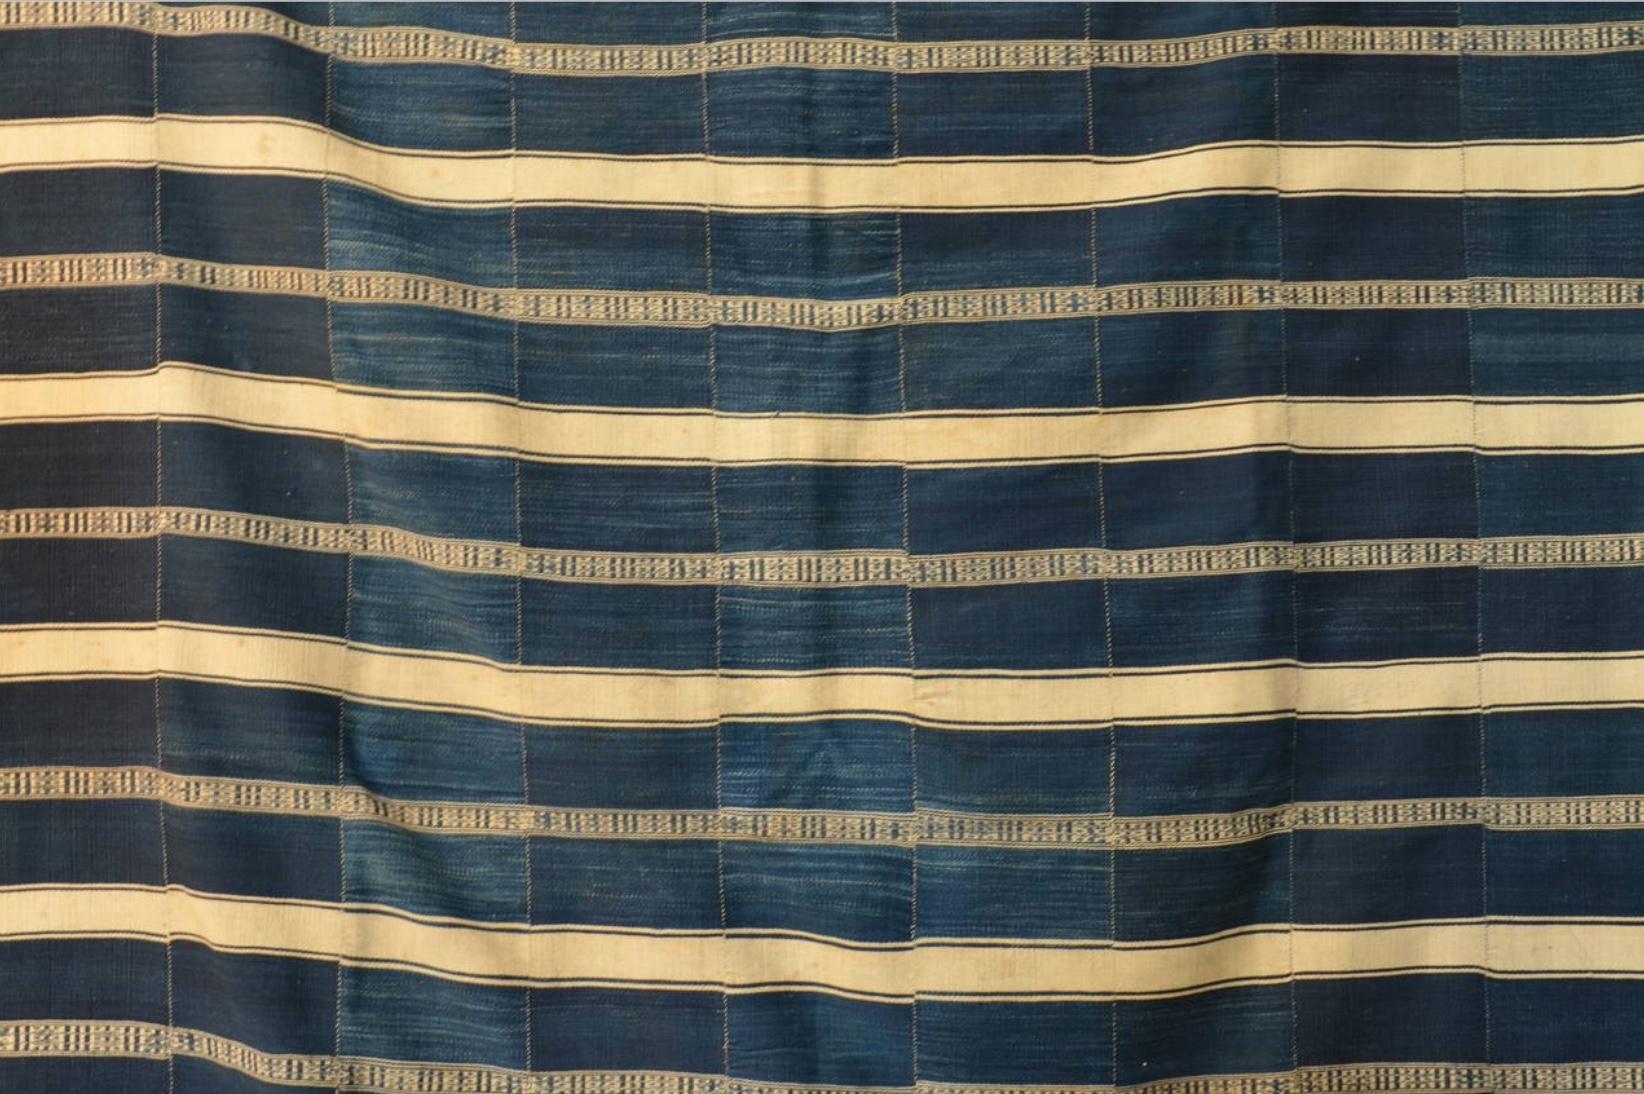 Museum Quality West African Indigo Textile. From Dahomey (Benin), Circa 1925. 

The same piece is in the permanent collection of Musée de l'Homme in Paris.

There has been a lot of interest for the highest quality African textiles lately, as